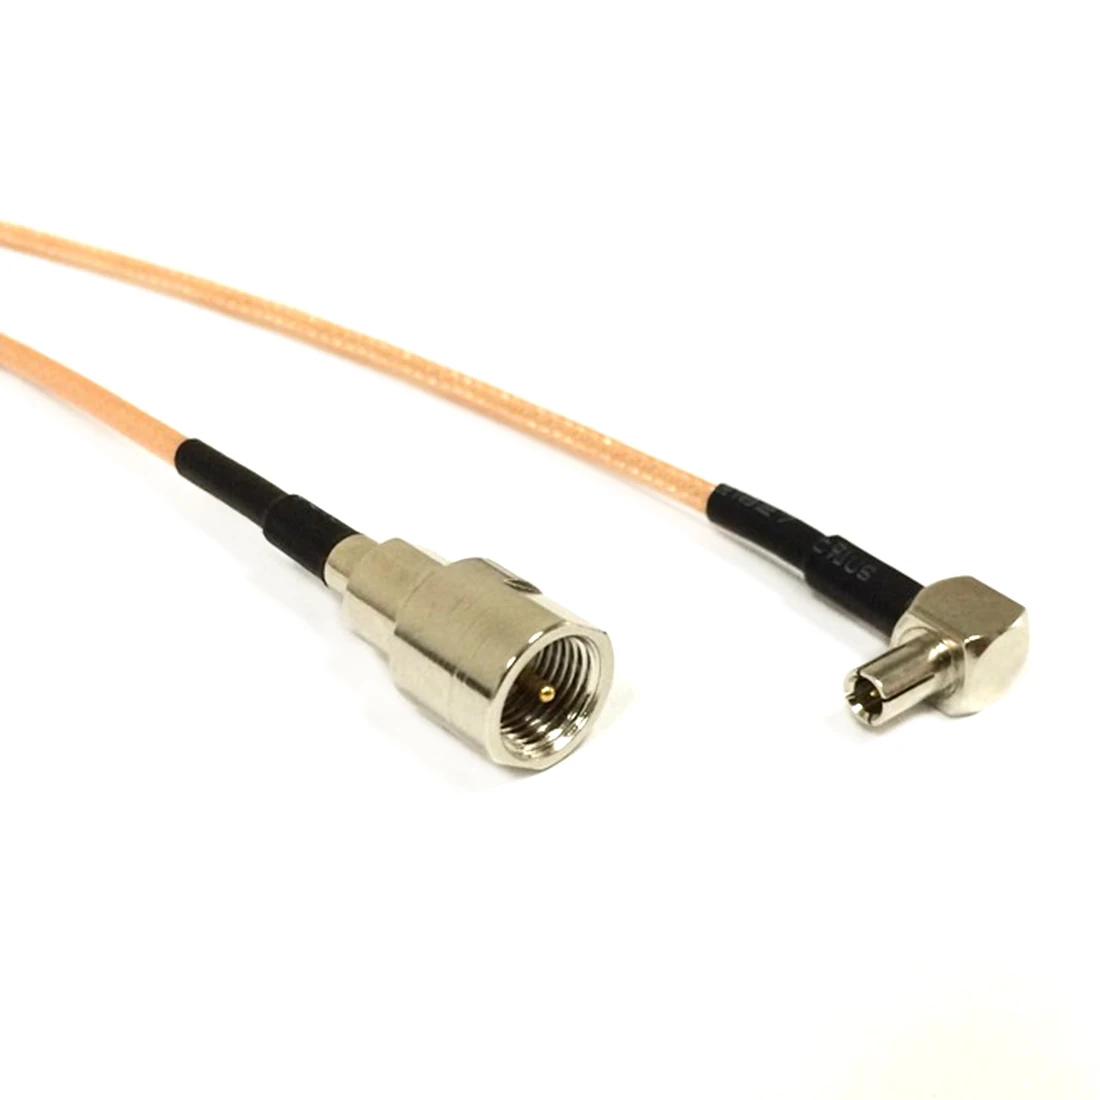 3G Antenna Cable FME  Male Plug  Switch  TS9 Male Plug  RG316 Pigtail Wholesale Fast Ship 15cm 6inch